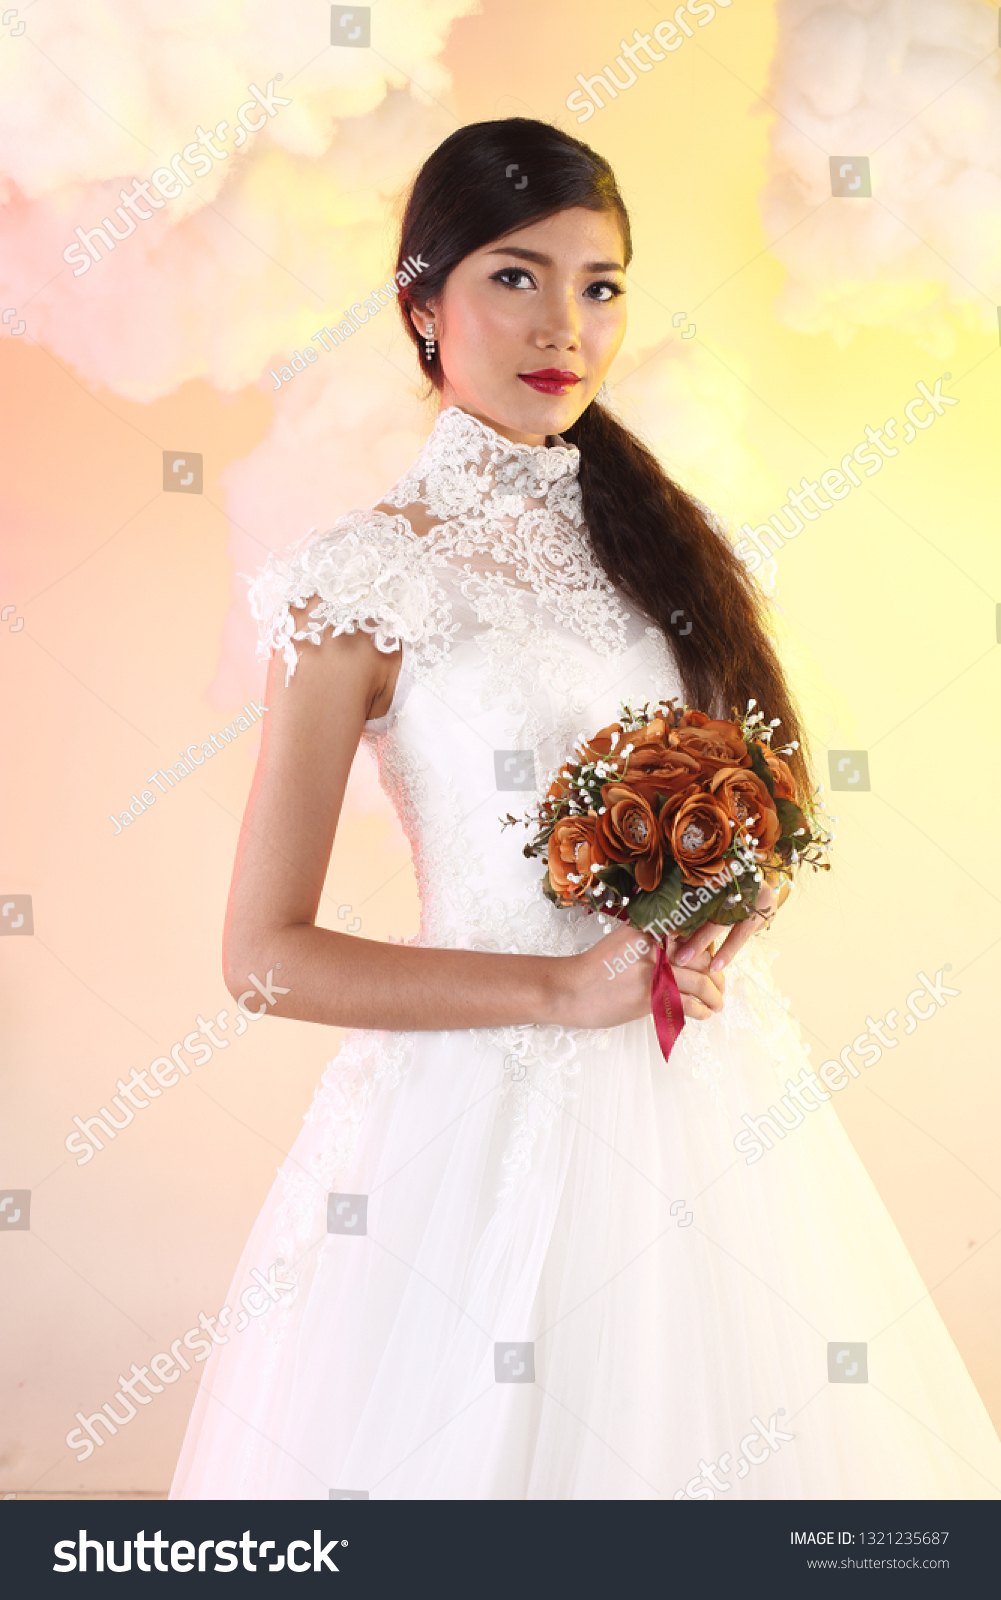 https://image.shutterstock.com/z/stock-photo-lovely-asian-beautiful-woman-bride-in-white-wedding-gown-dress-with-lace-veil-black-hair-studio-1321235687.jpg